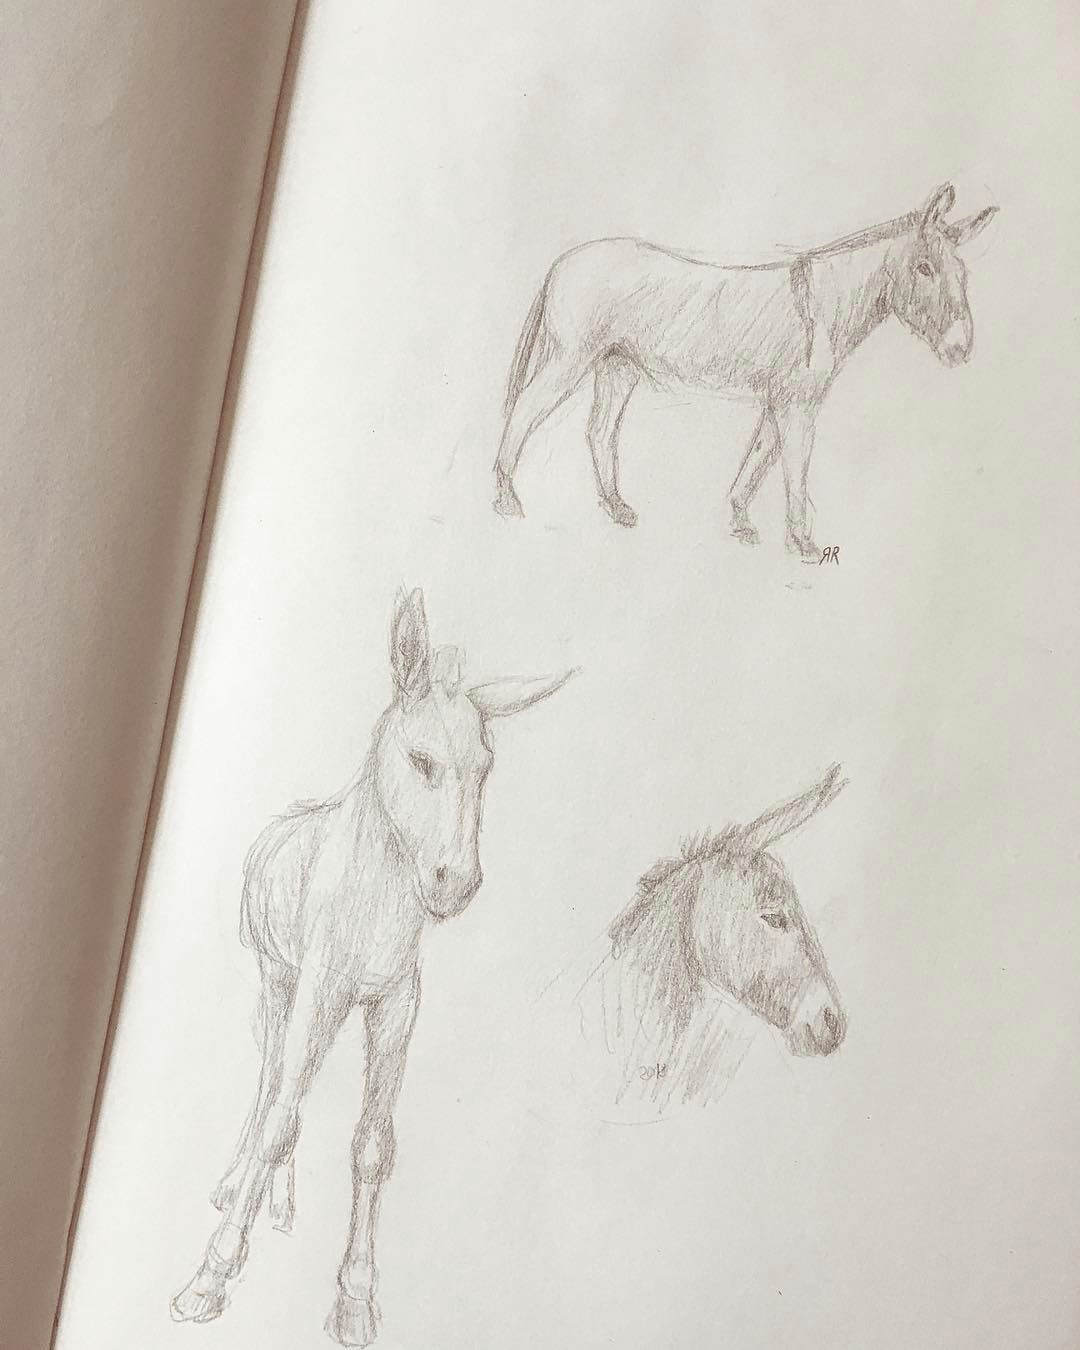 Gesture Drawings Of Animals Drawing Dailydrawing Pencildrawing Animals Art4share